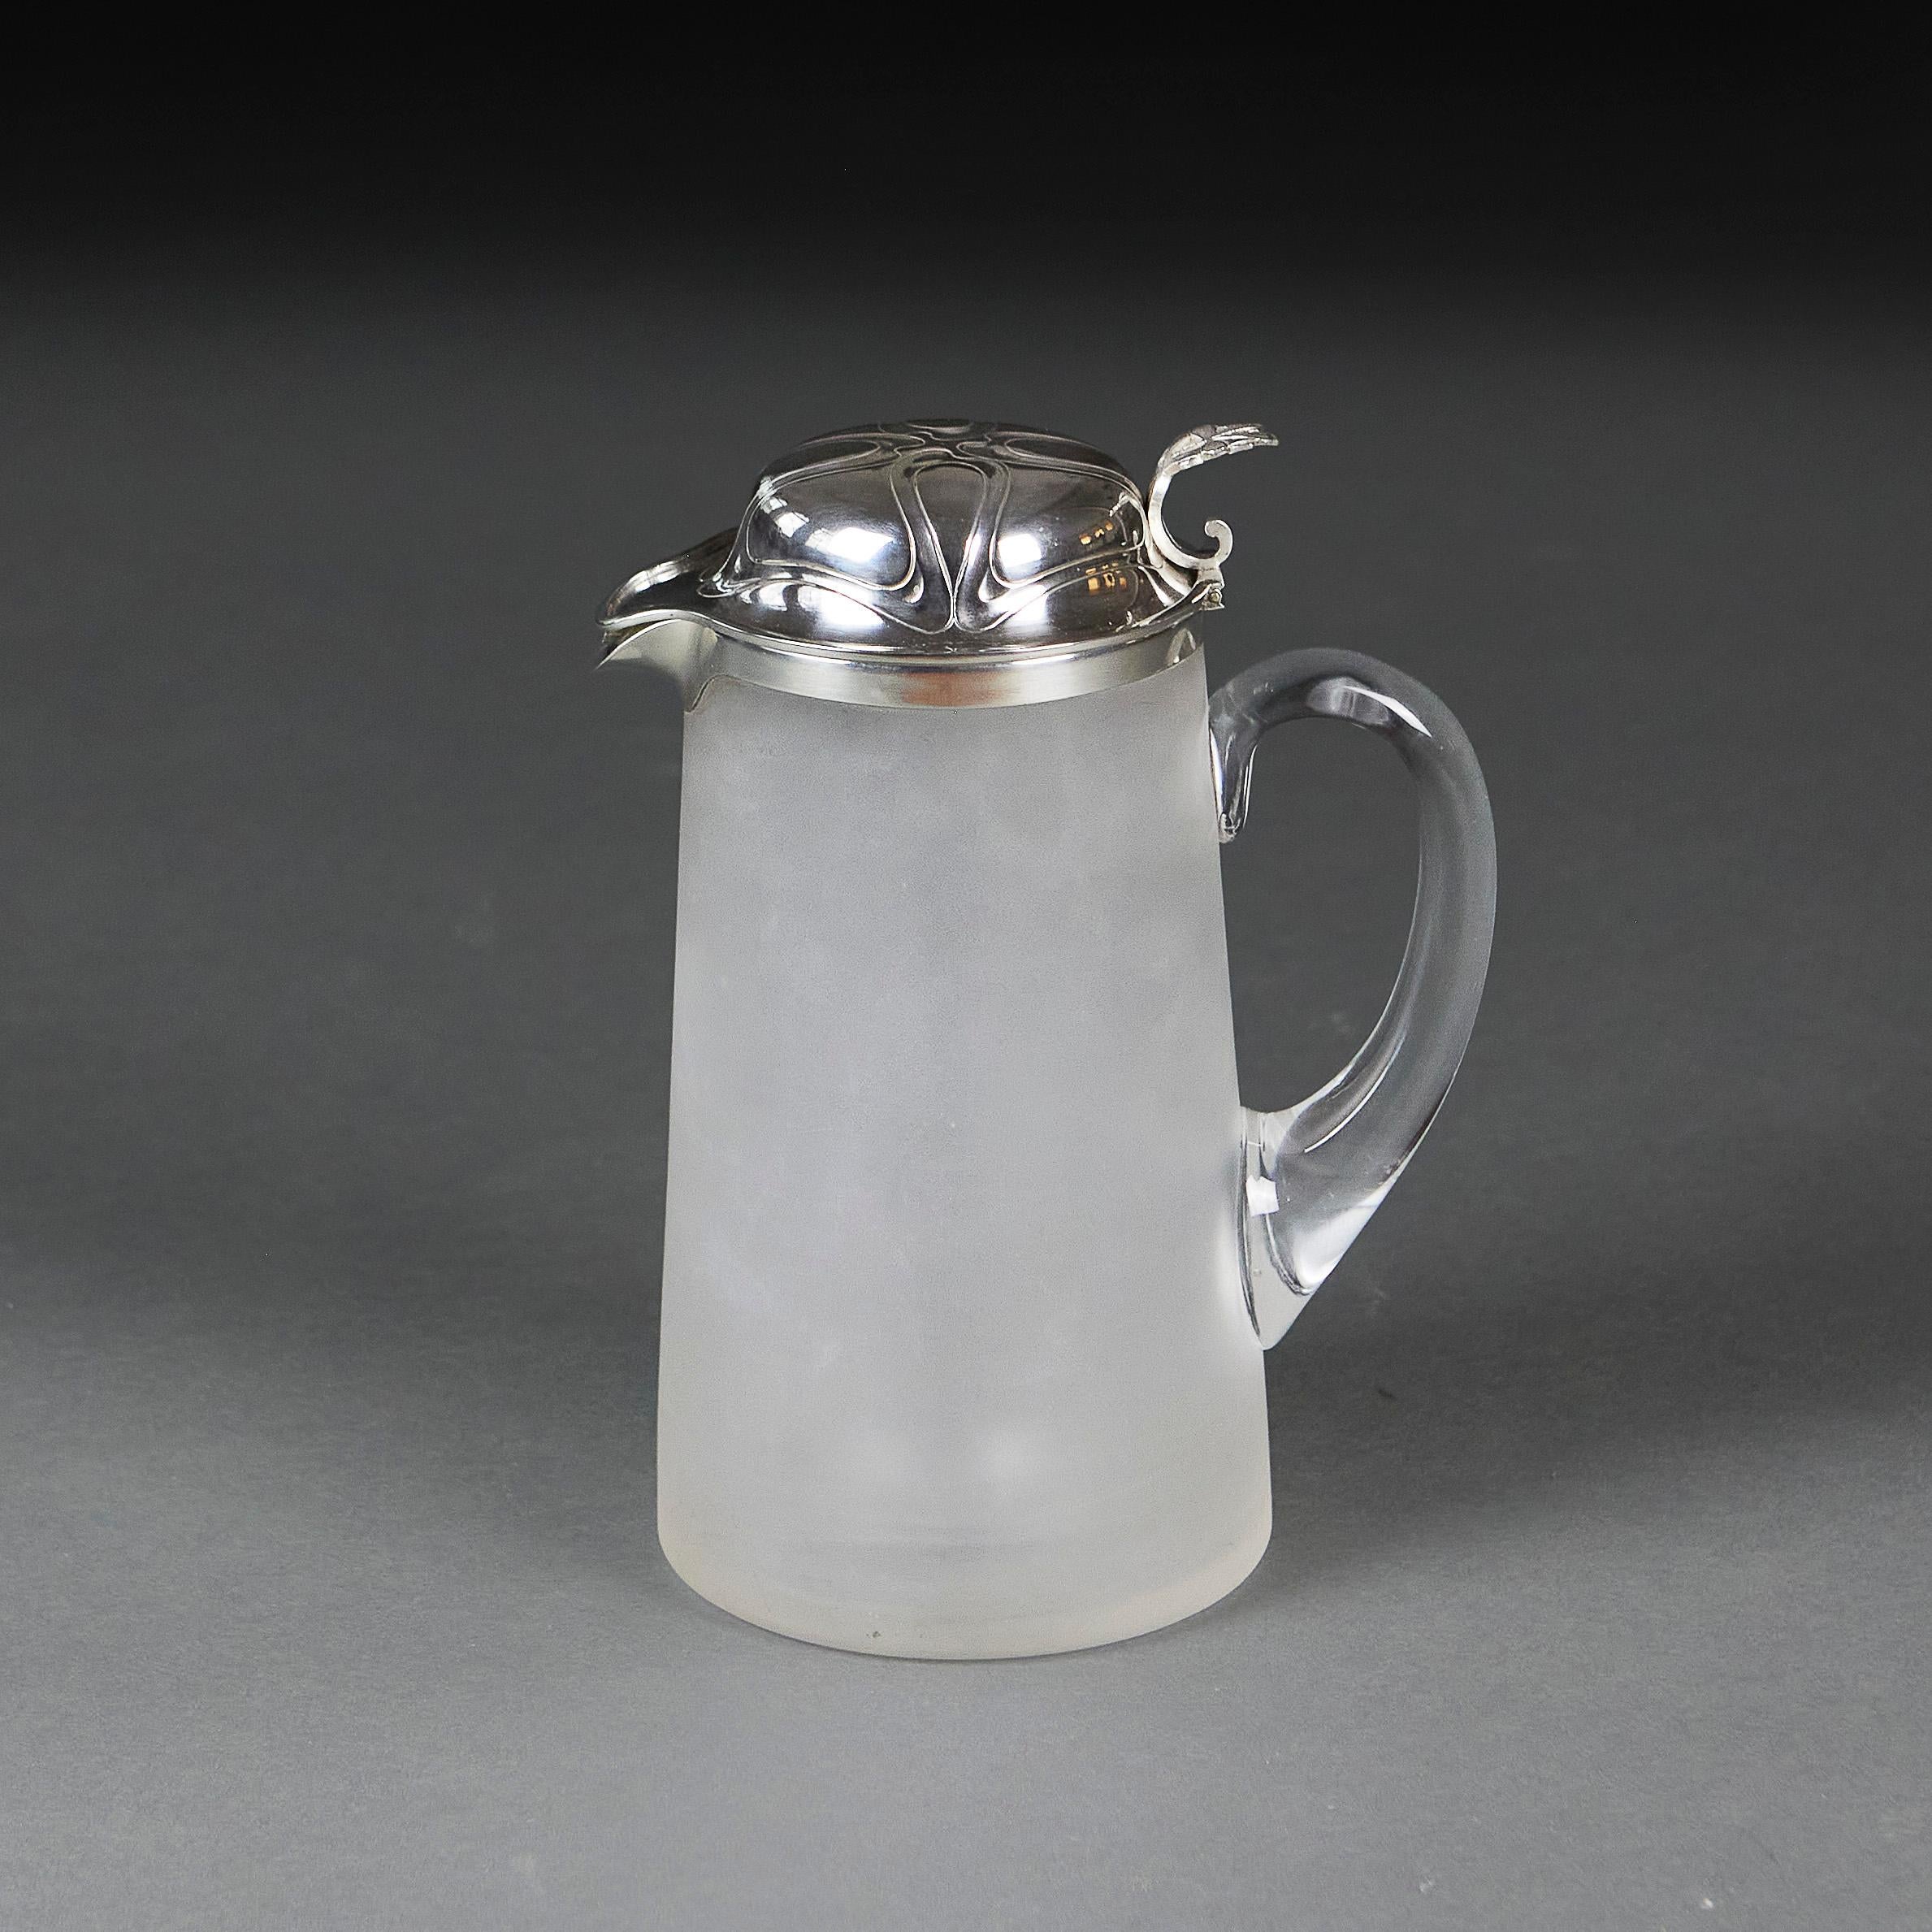 France, circa 1910
An Art Nouveau frosted glass lemonade jug, with engraved silver lid of foliate designs and glass ice pocket cavity within. 

Height    26.00cm
Diameter    13.00cm